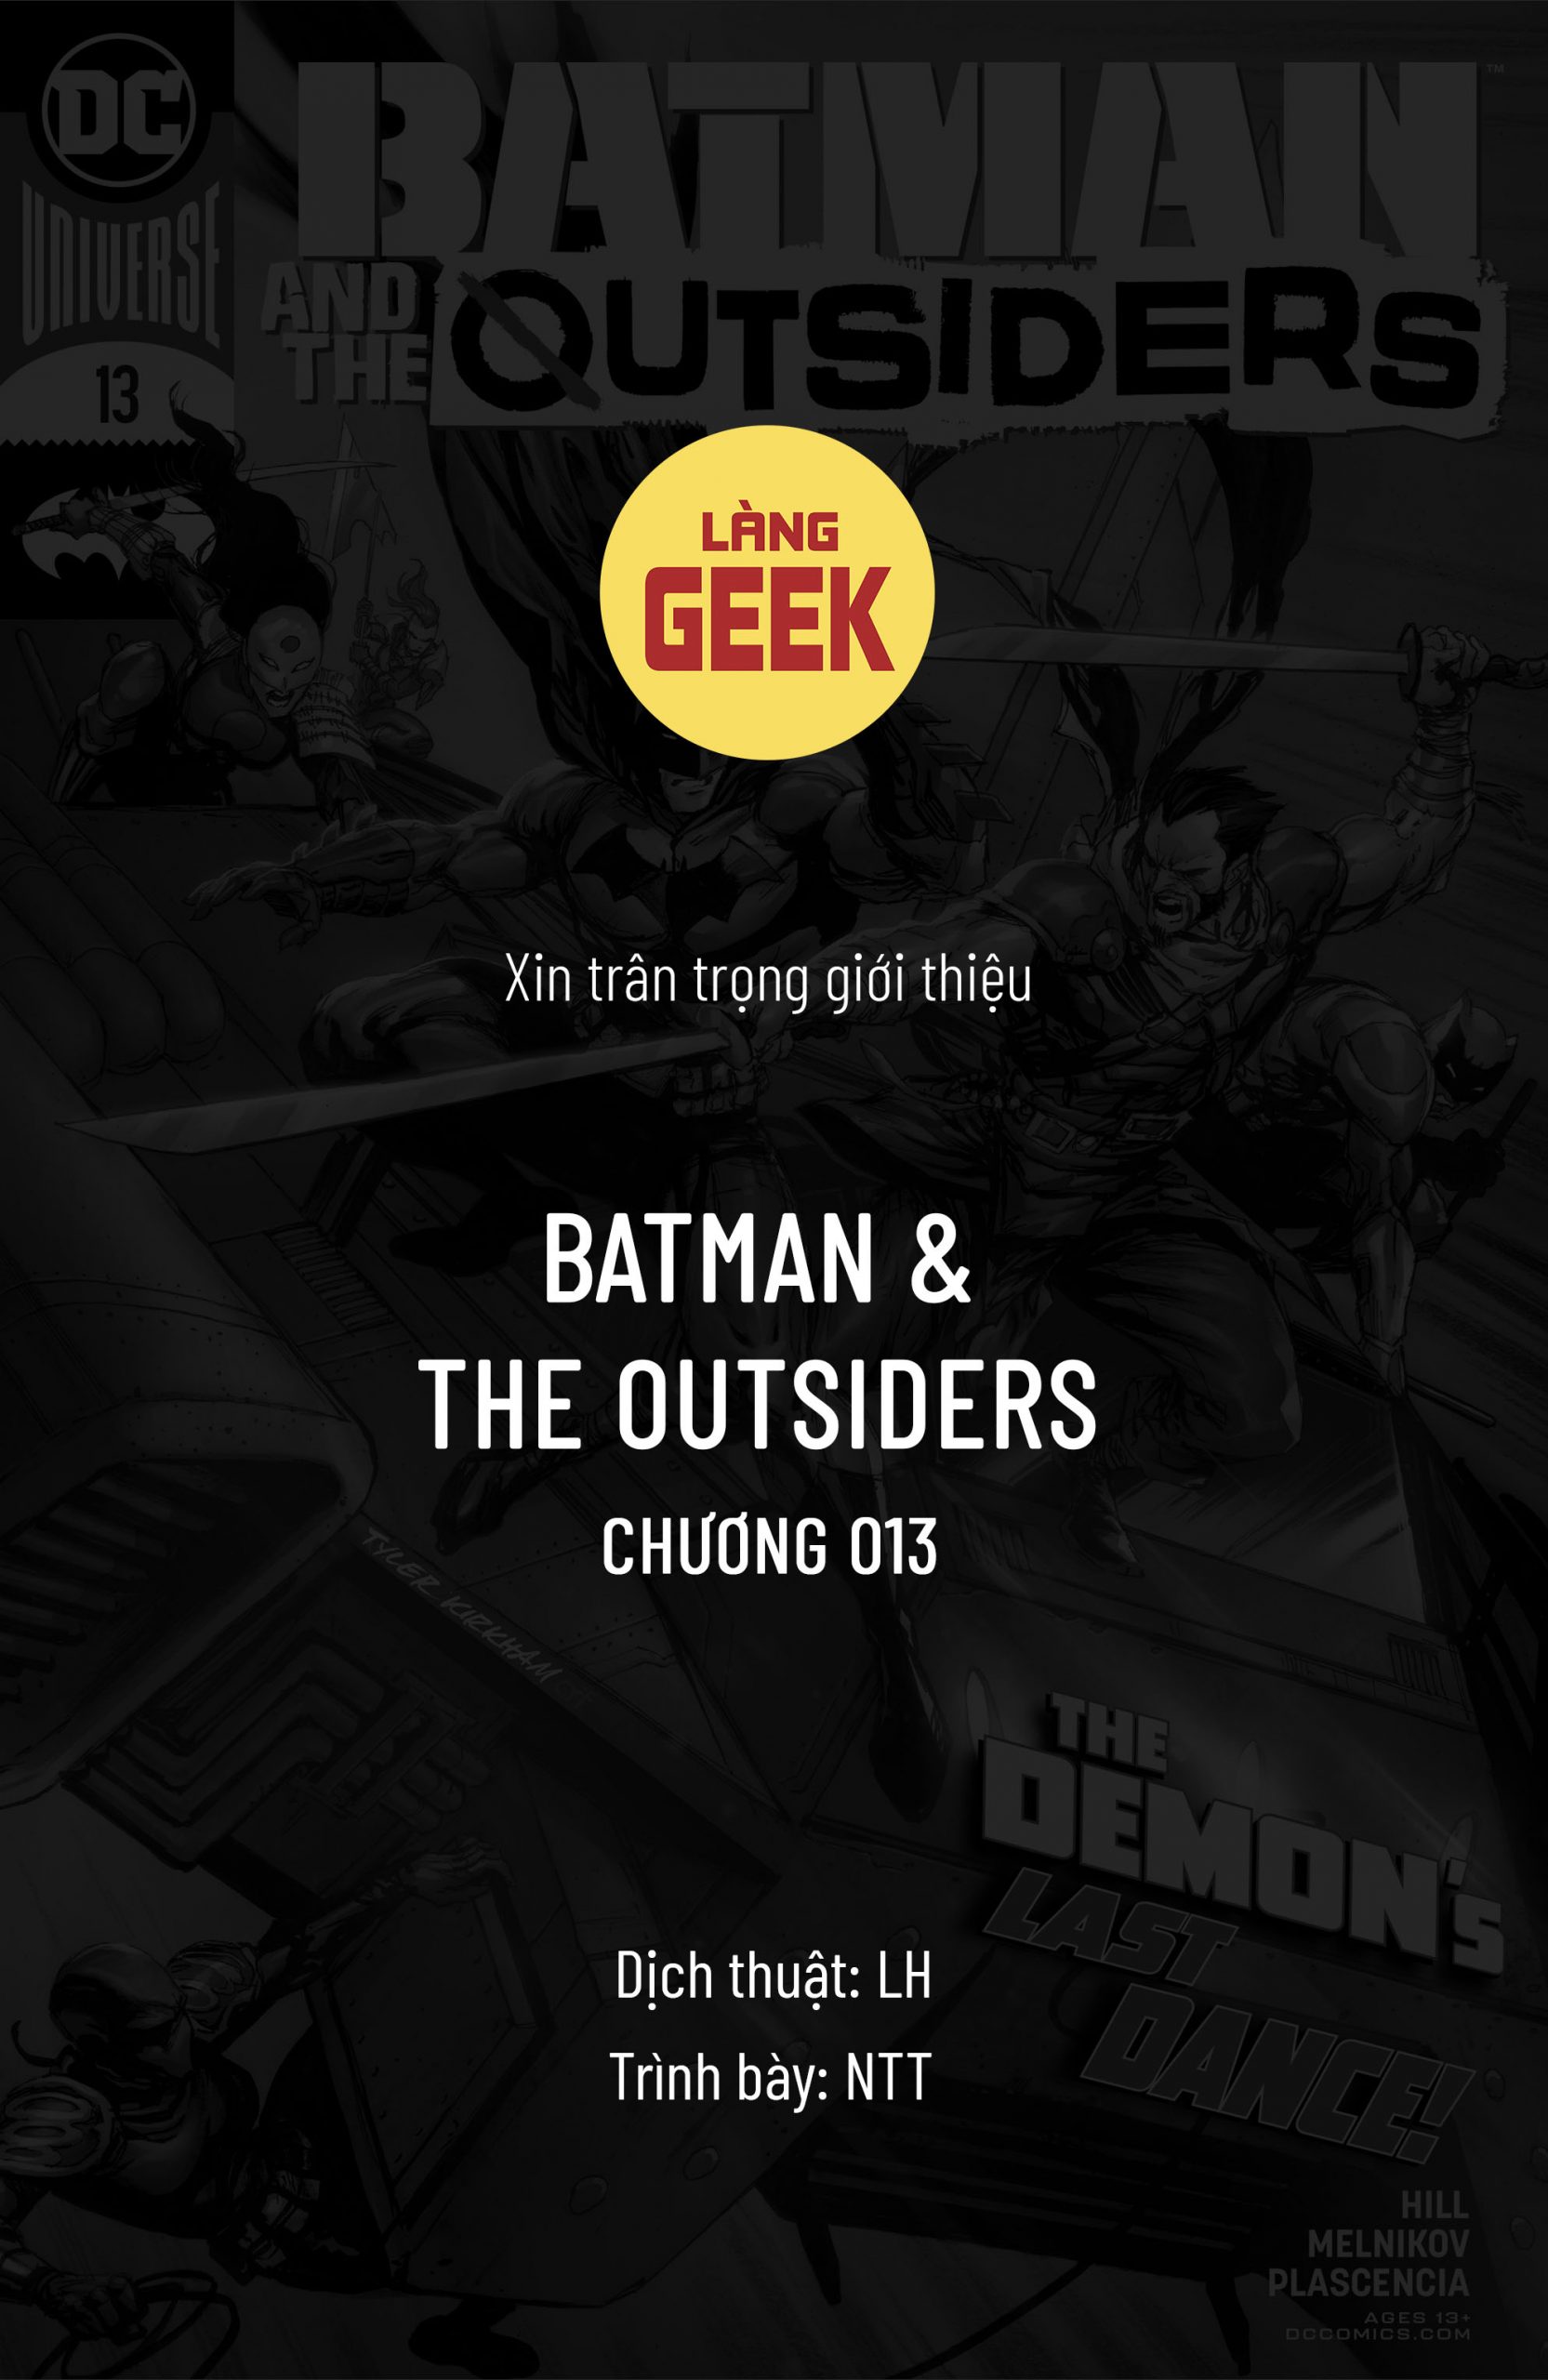 https://langgeek.net/wp-content/webpc-passthru.php?src=https://langgeek.net/wp-content/uploads/2021/12/Batman-and-the-Outsiders-013-001-scaled.jpg&nocache=1